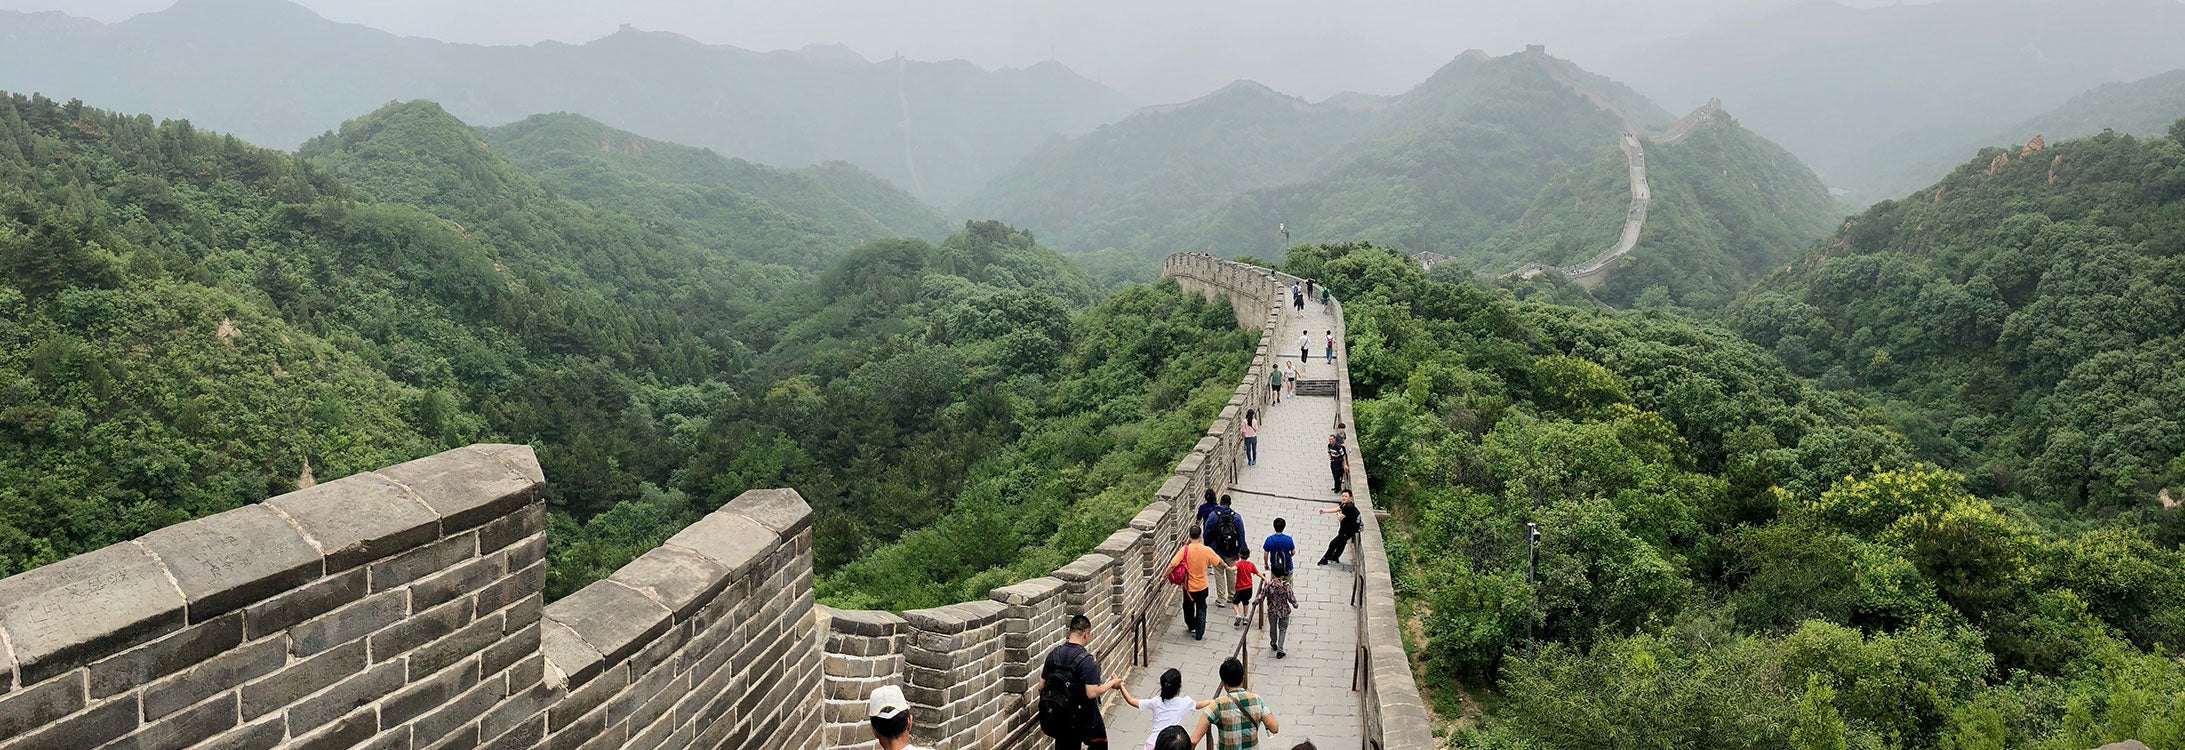 This summer, ECU students visited many new destinations during their study and research abroad trips, including The Great Wall of China.